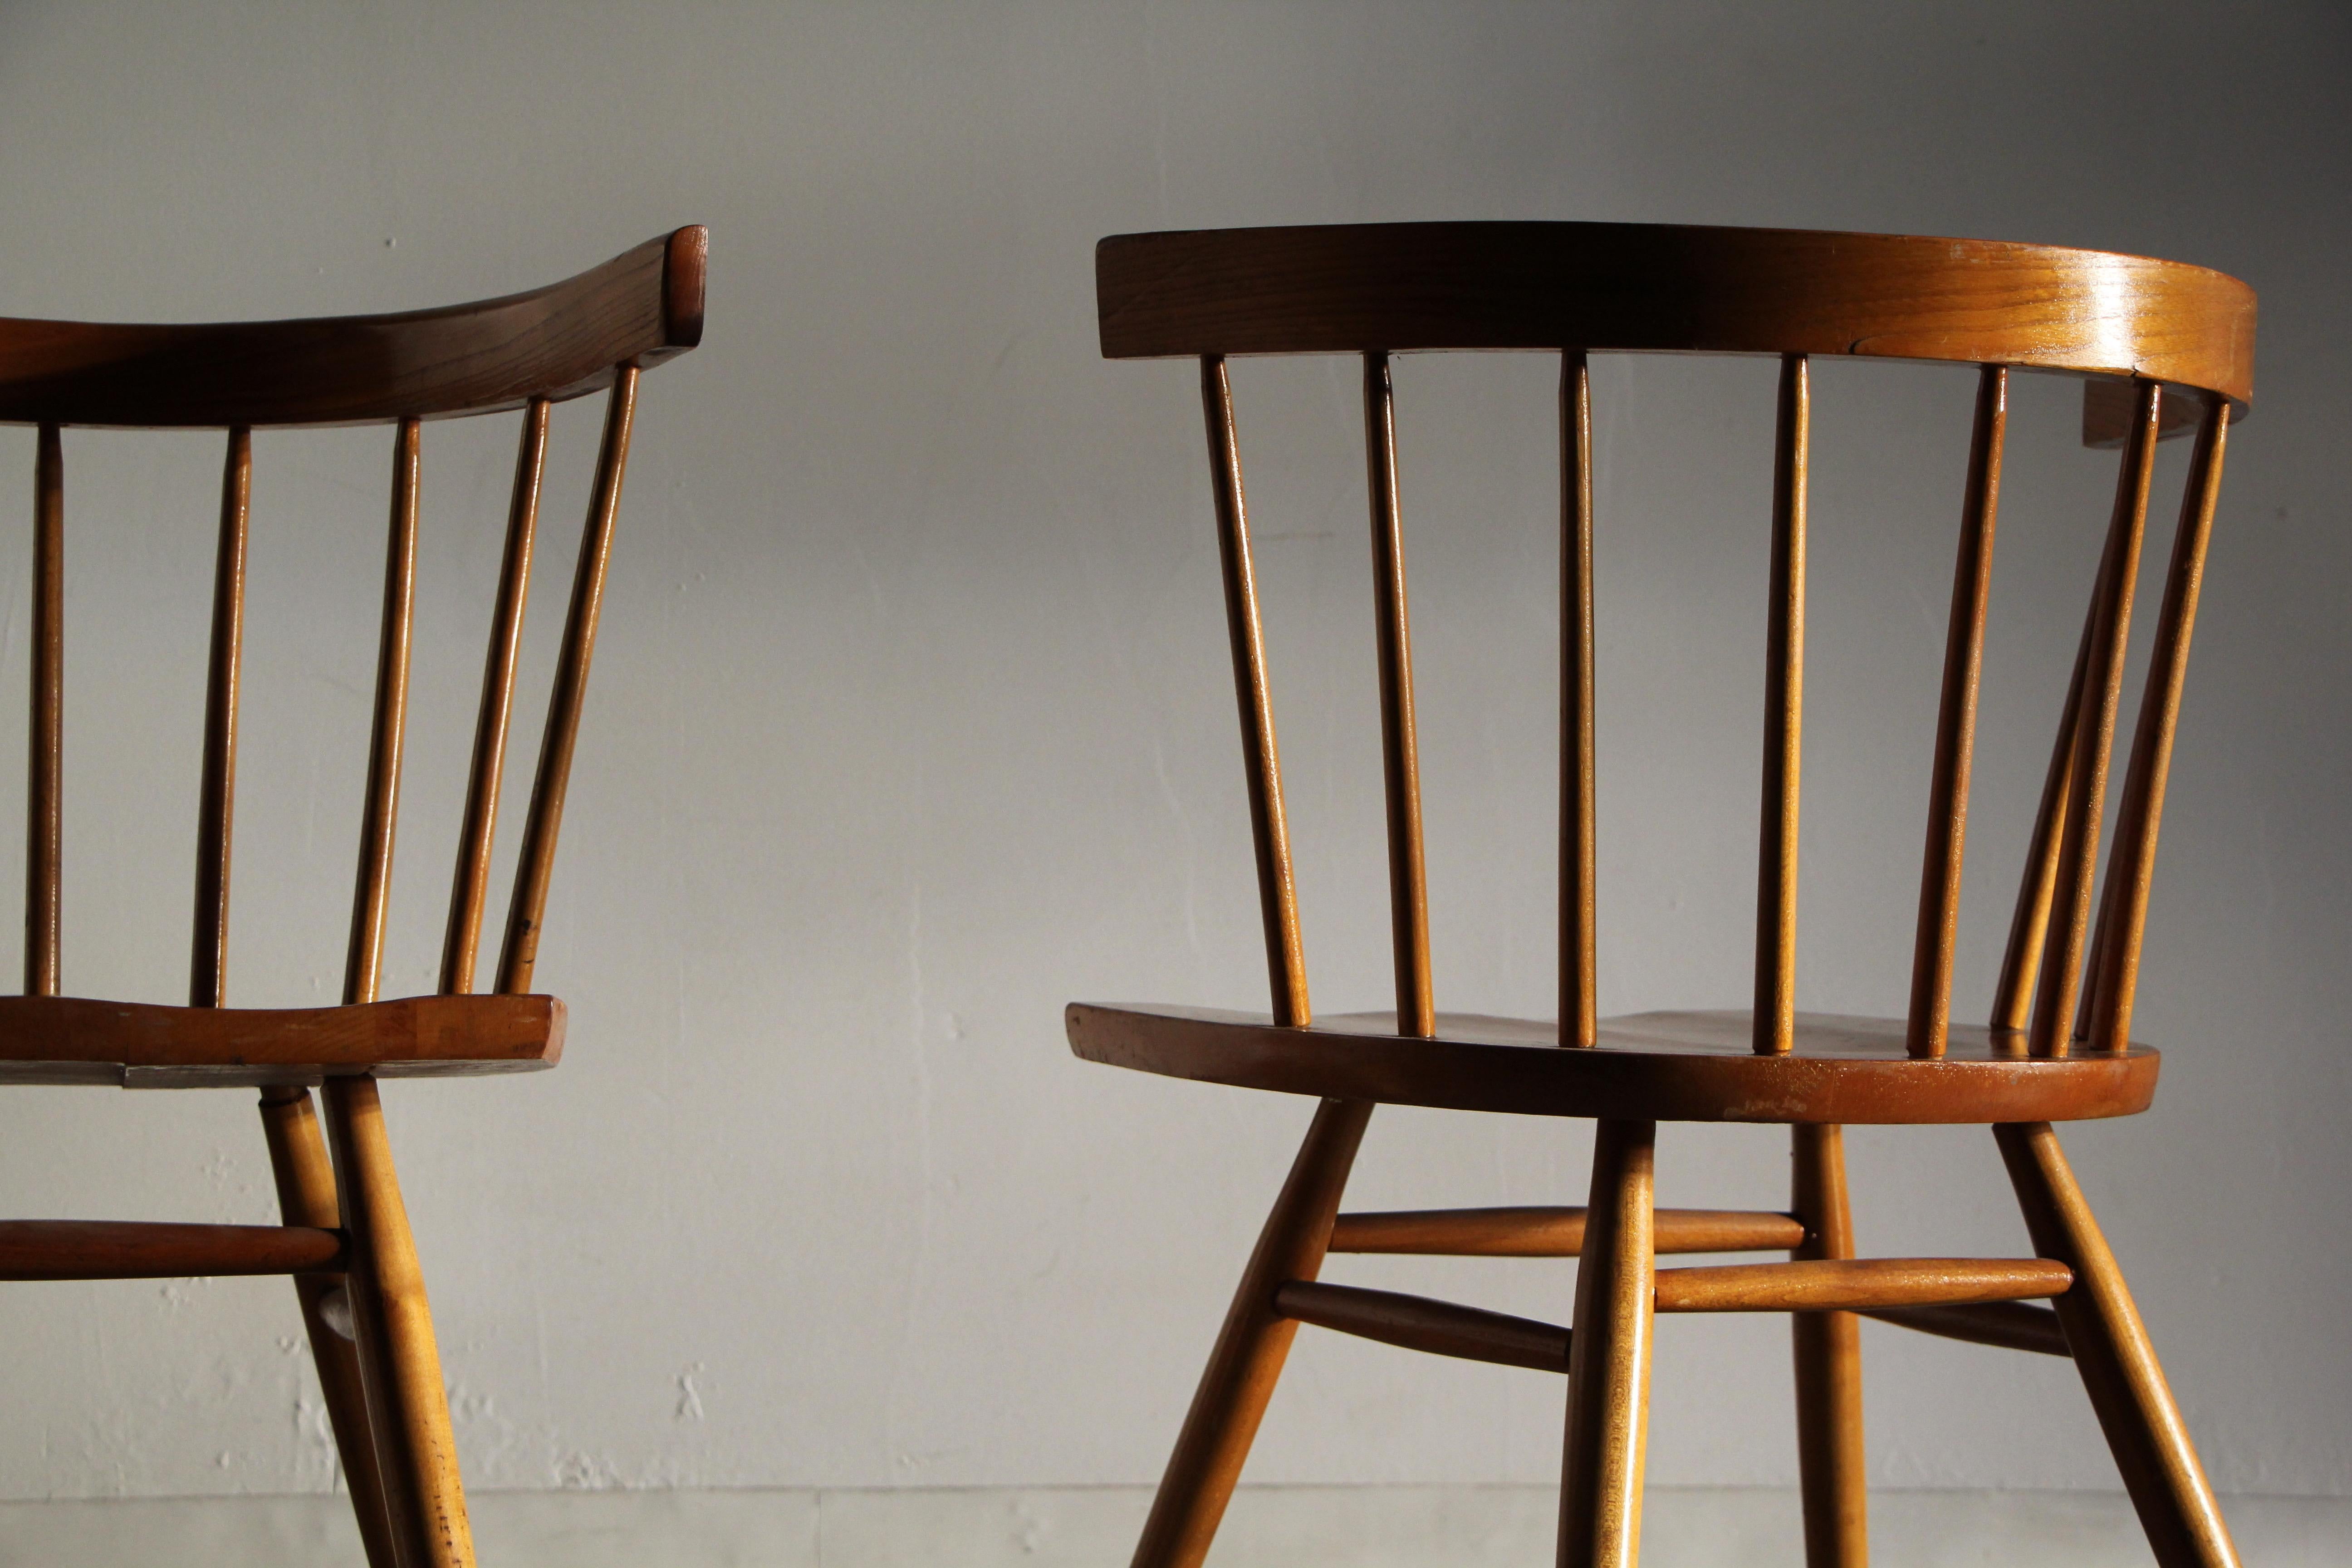 American Pair of George Nakashima Hickory Straight Chairs for Knoll, 1940s